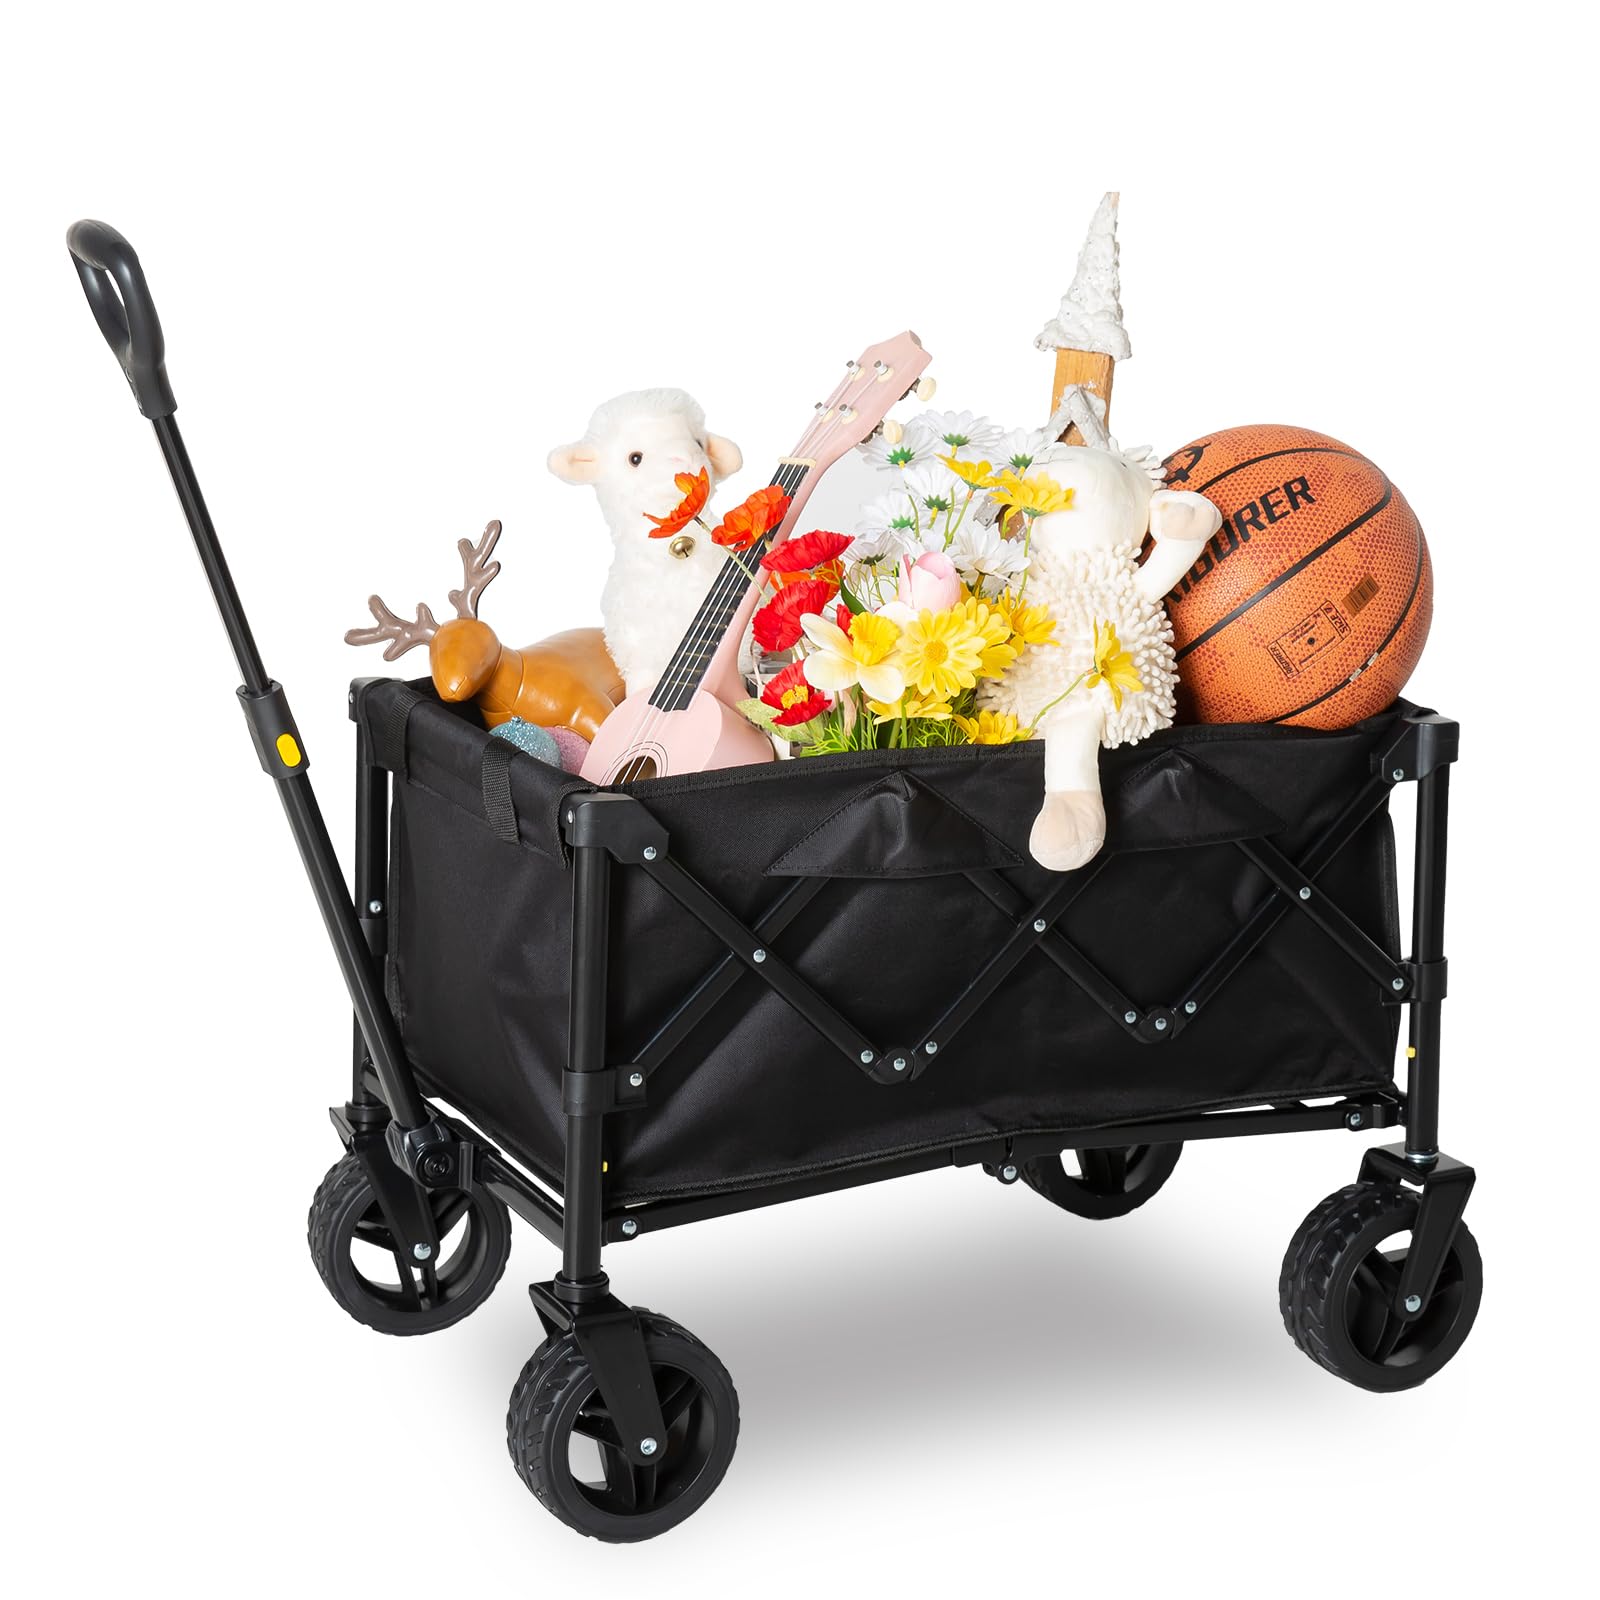 Collapsible Wagon, All Terrain Wagon with 220lbs Weight Capacity Portable Grocery Wagon for Shopping, Sports, Garden and Apartment